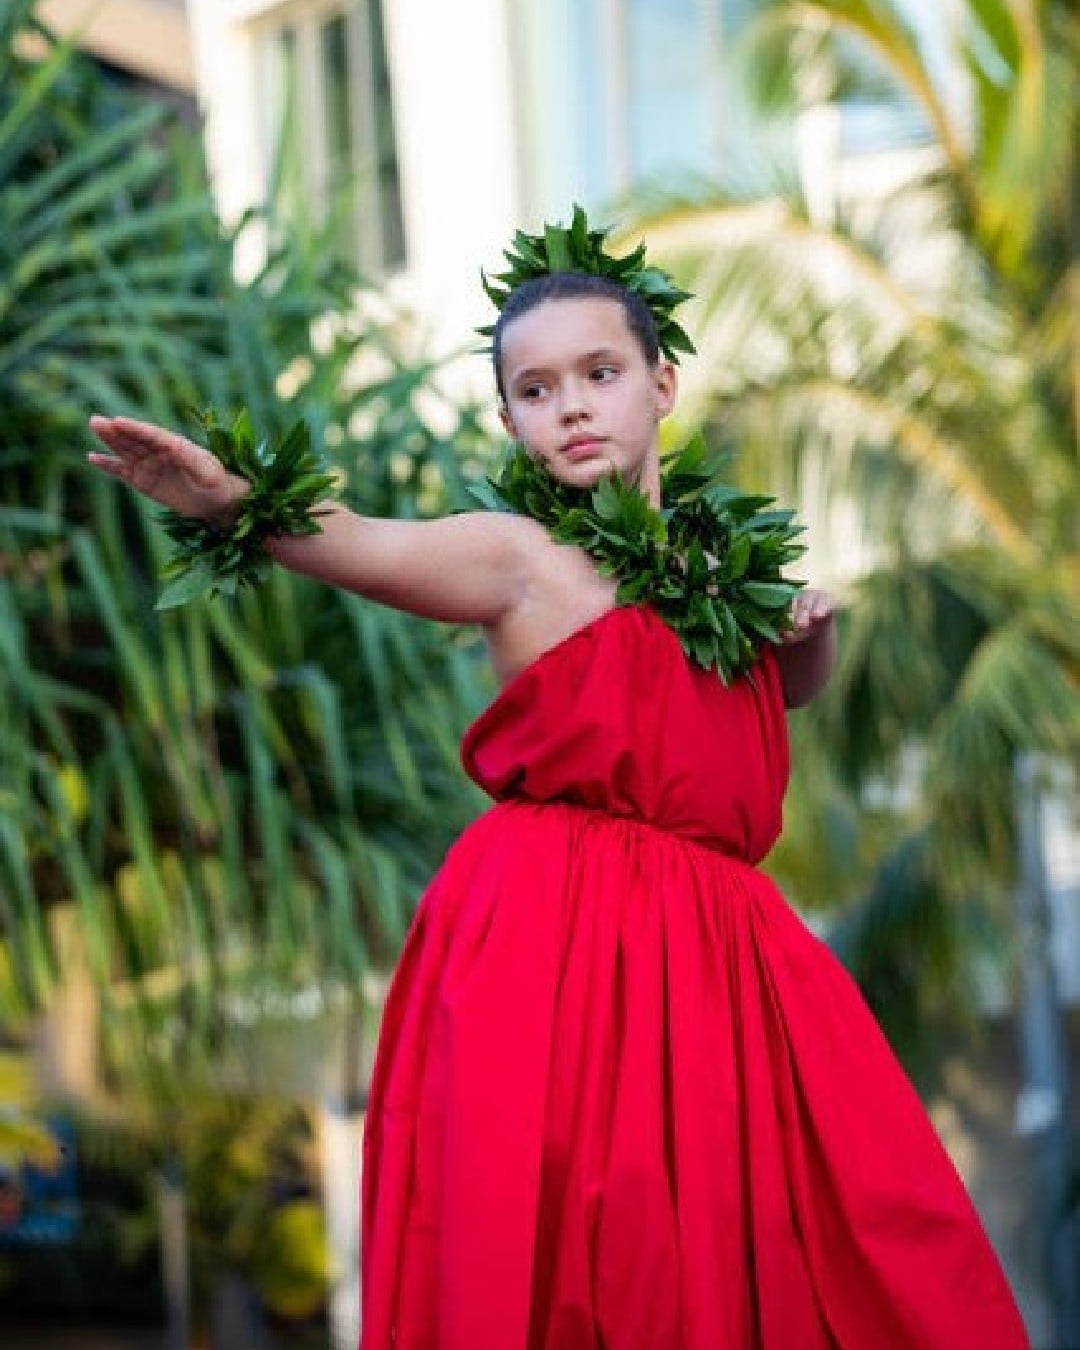 Mahalo to all those who celebrated with us at Kona Nui Nights last week! It was a vibrant evening filled with inspiring live Hawaiian music, storytelling and hula. Please join us for the next Kona Nui Nights event on October 5 from 6pm – 8pm at Victoria Ward Park. Check the link in our bio to learn more.